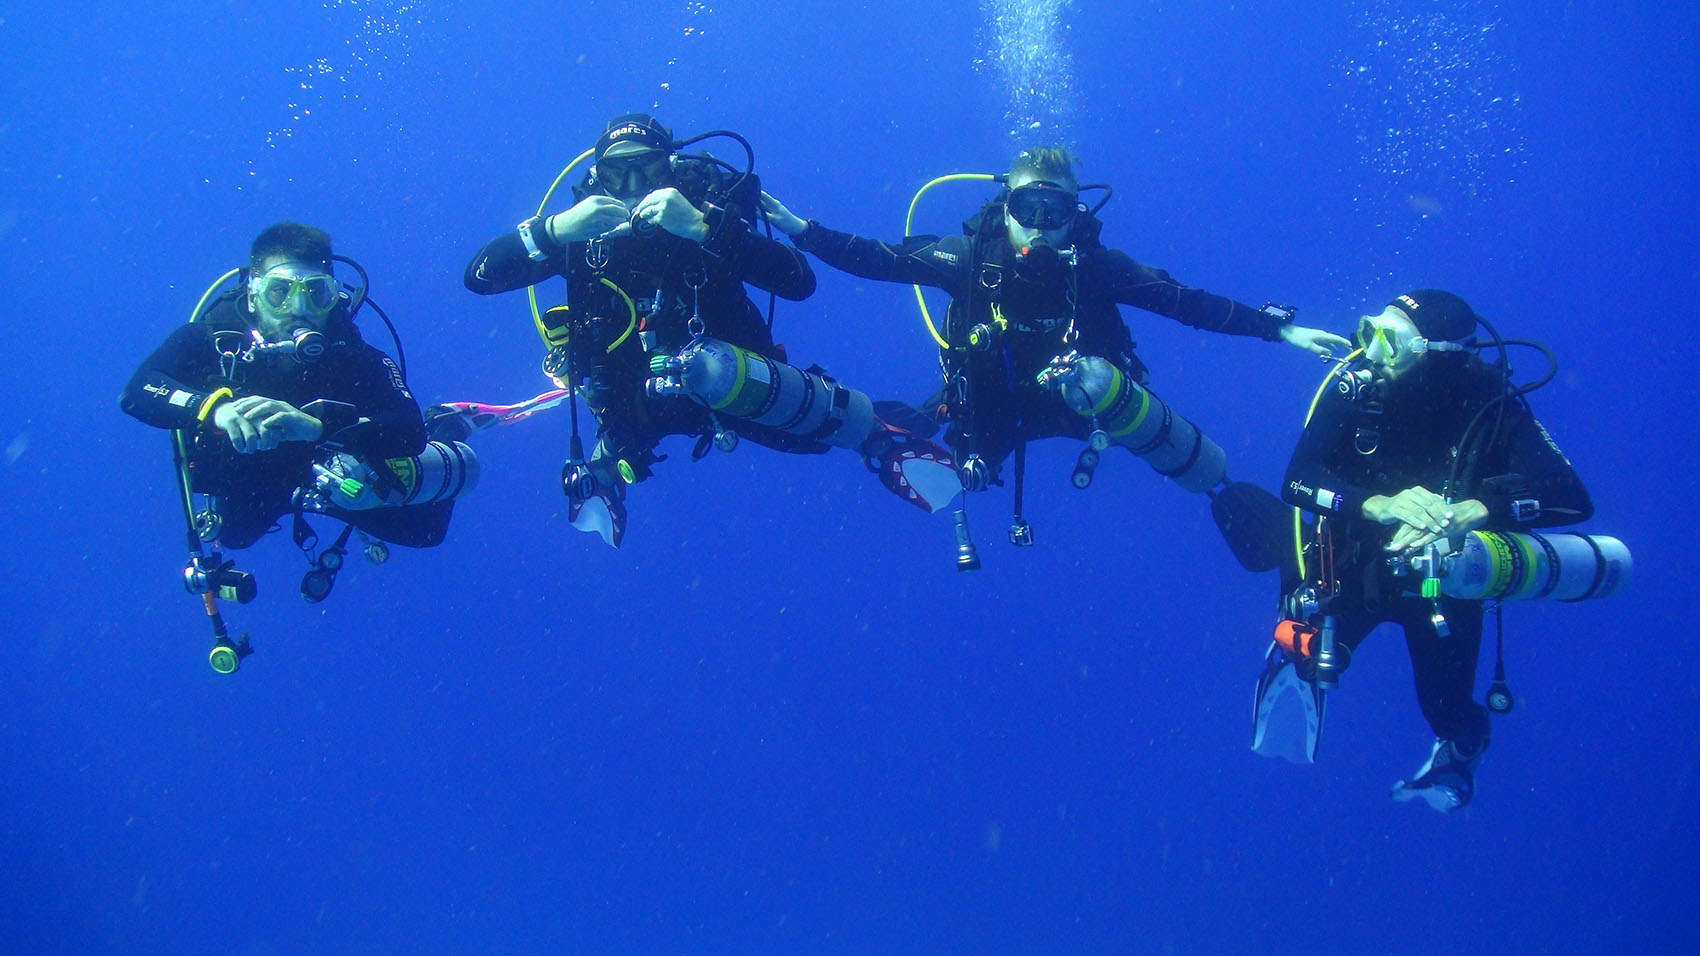 Blue Bottom Diving - All You Need to Know BEFORE You Go (with Photos)